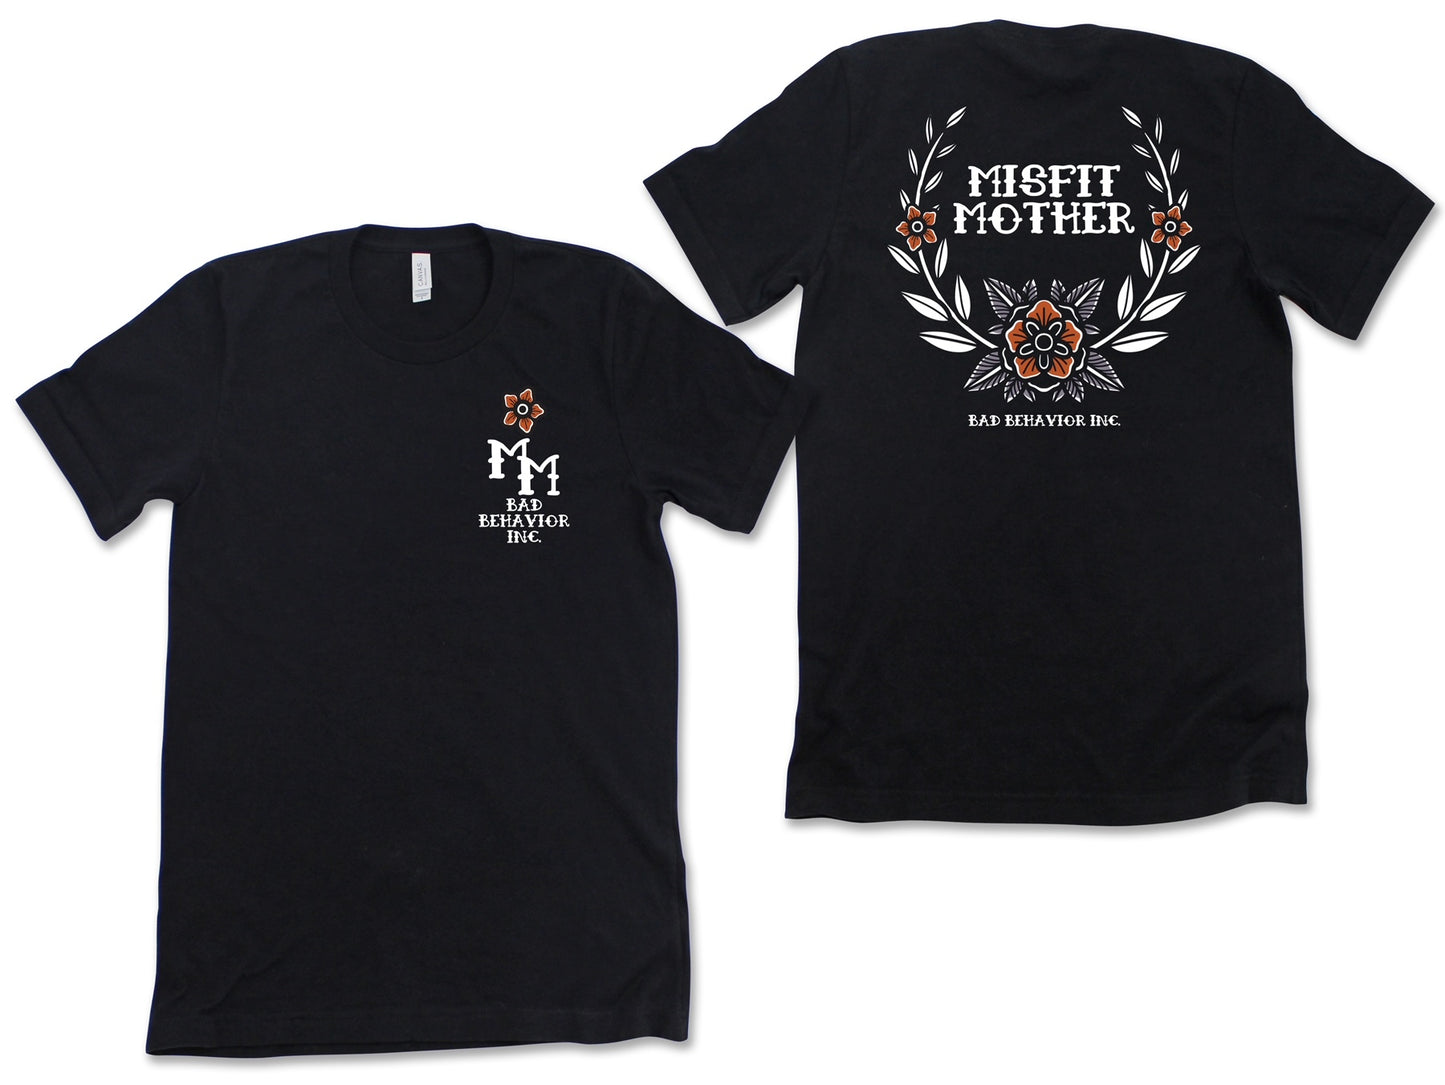 Traditional Misfit Mother Tshirt